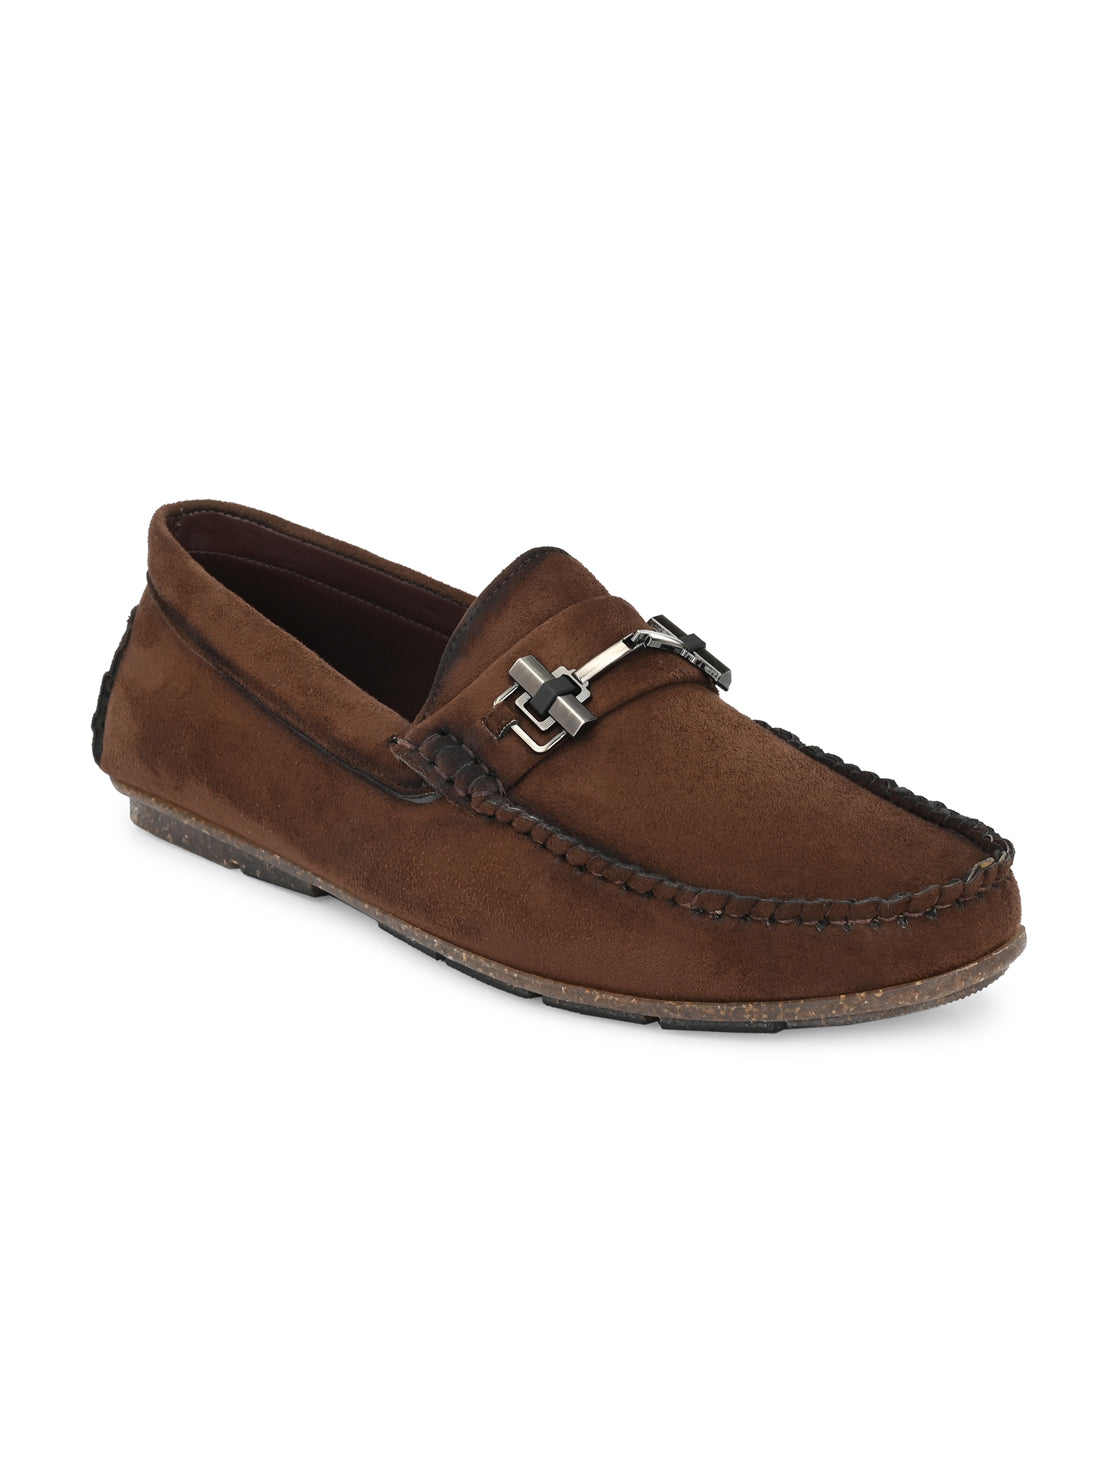 Guava Men's Brown Casual Slip On Driving Loafers (GV15JA765)